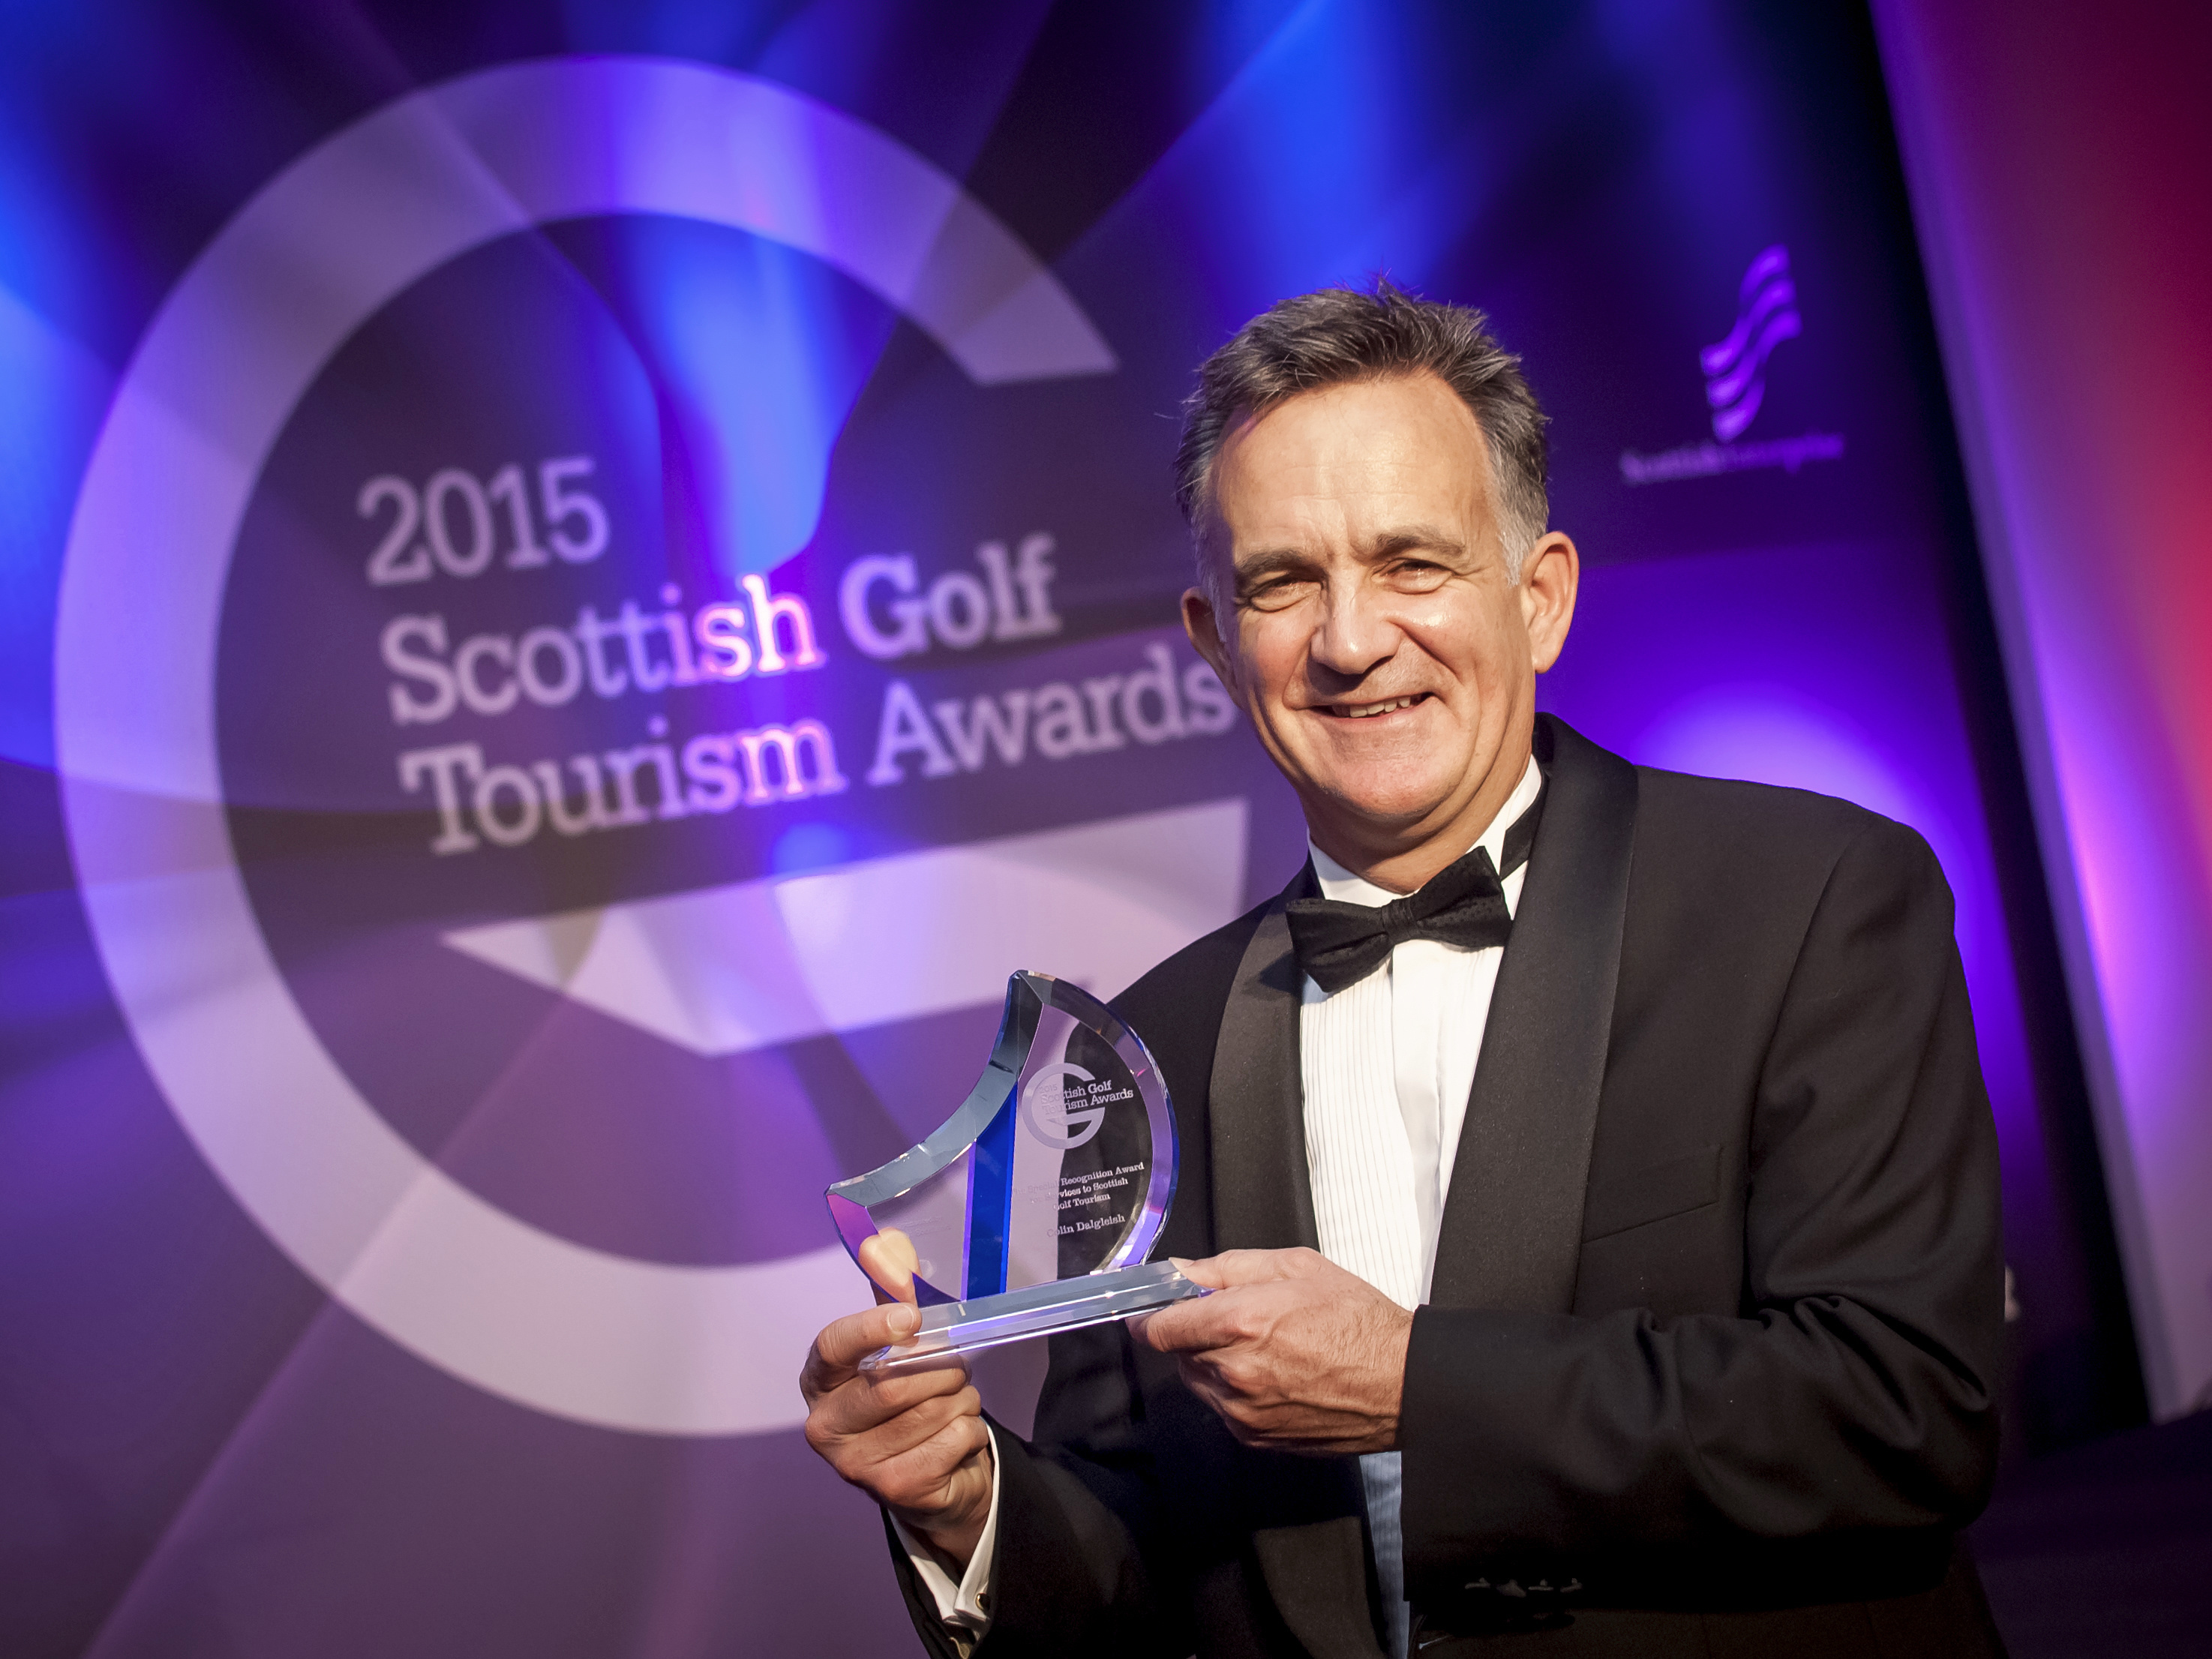 PerryGolf Co-Founder, Colin Dalgleish, receives Special Recognition Award at 2015 Scottish Golf Tourism Awards - PerryGolf.com